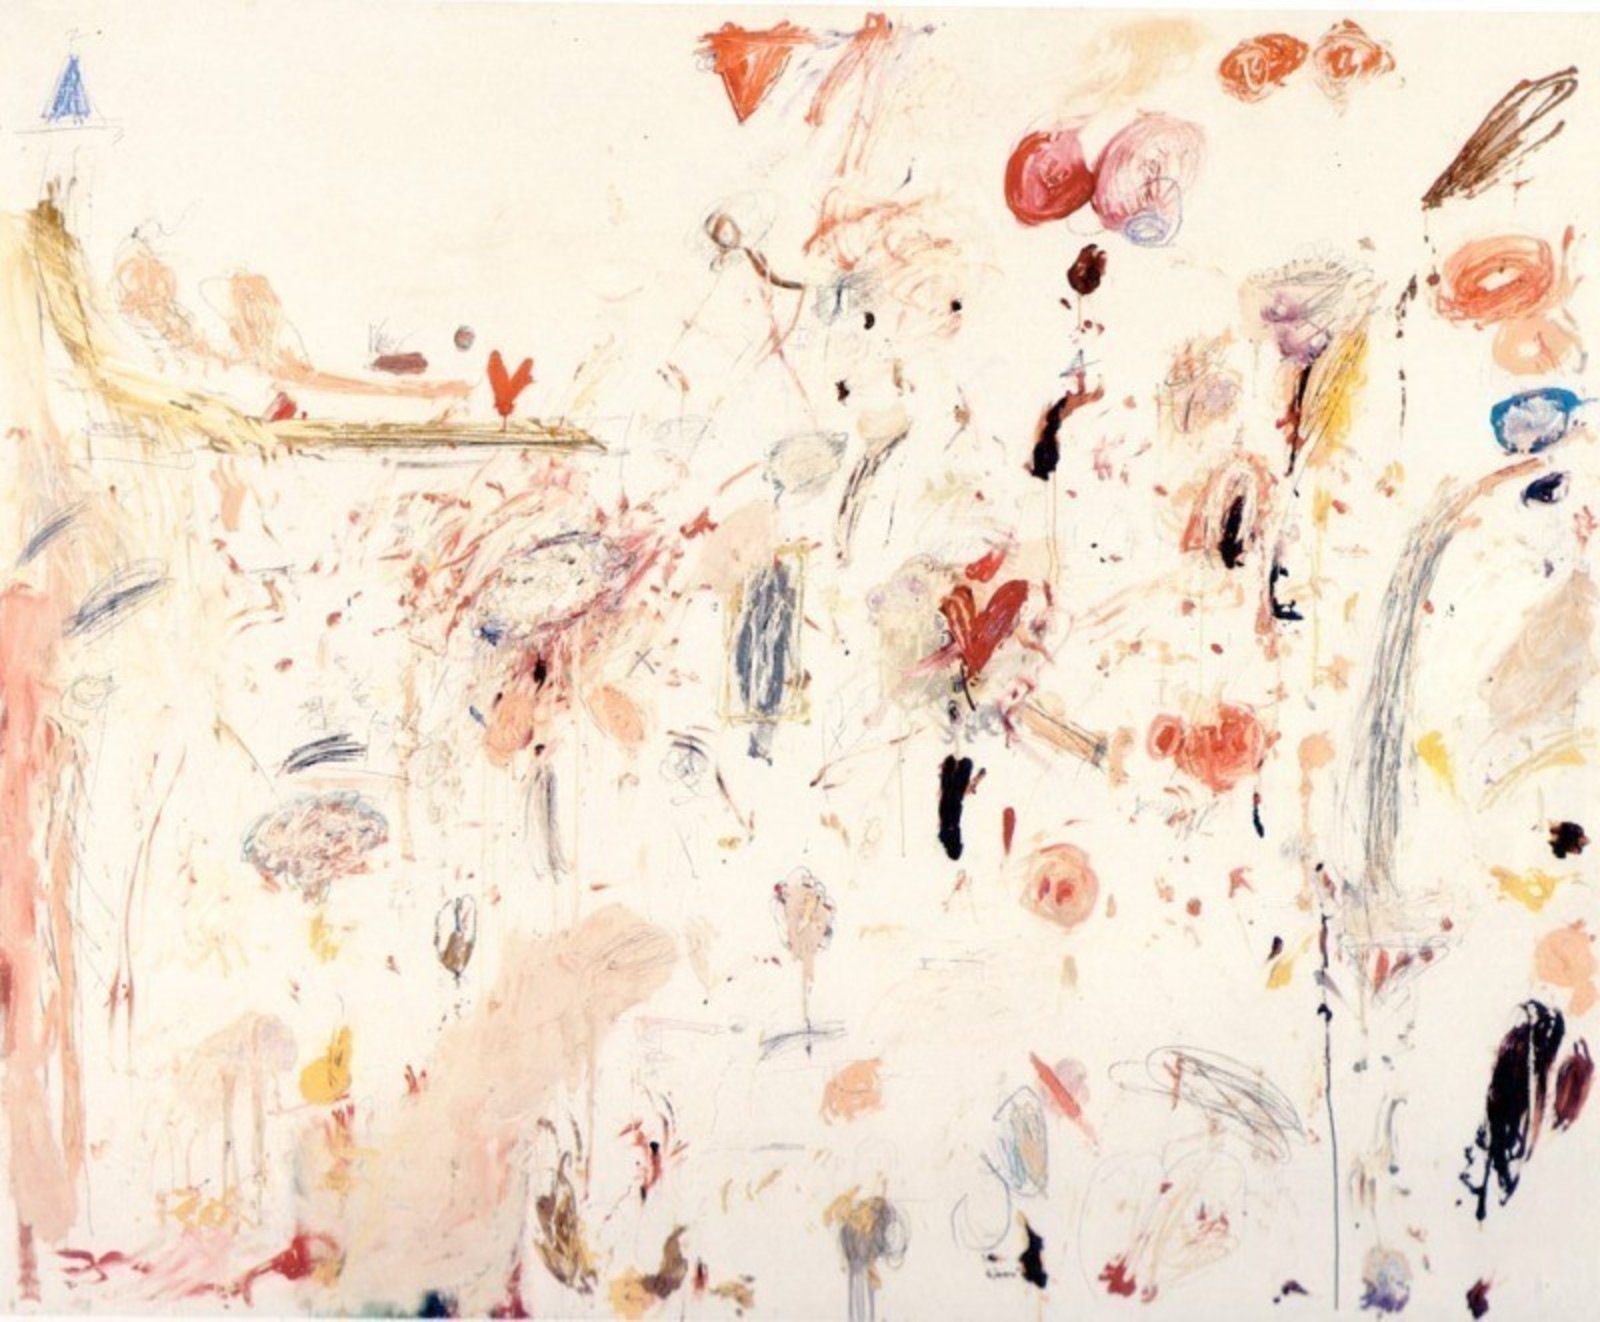 Cy Twombly. Untitled. 1961. Oil, house paint, crayon, and pencil on canvas. 256 x 307 cm. Private collection